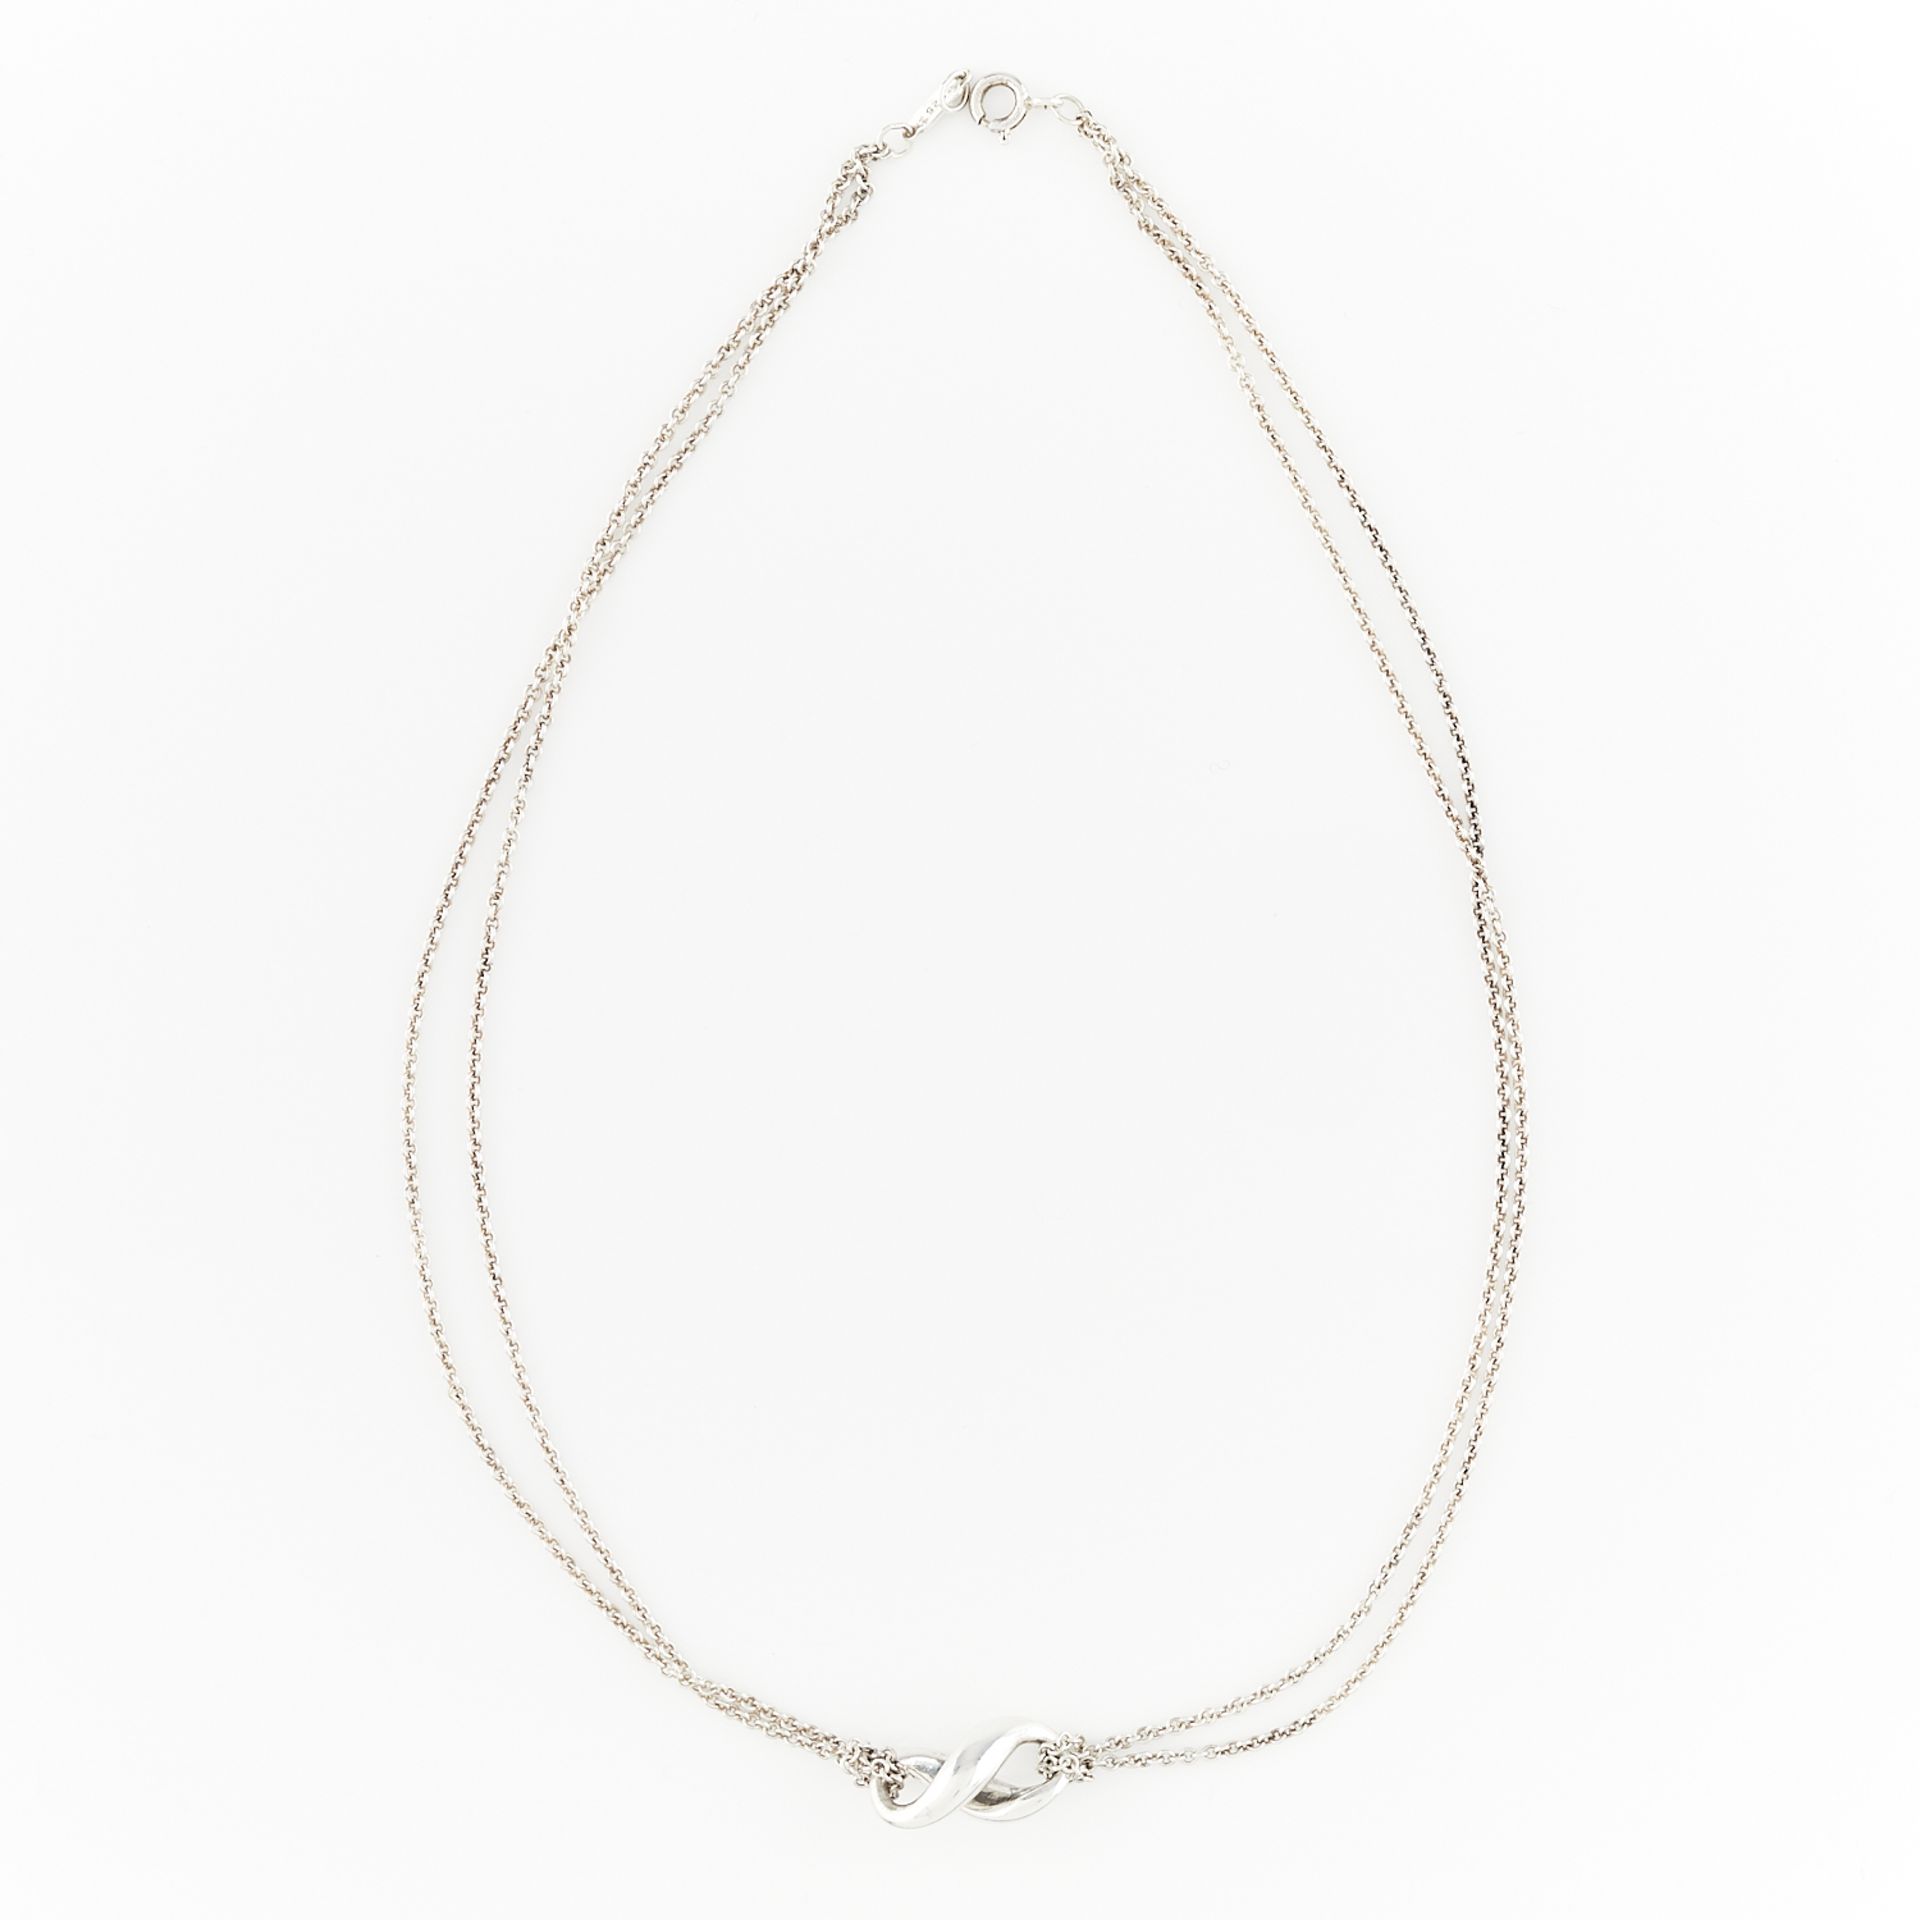 Tiffany & Co. Infinity Necklace - Image 4 of 8